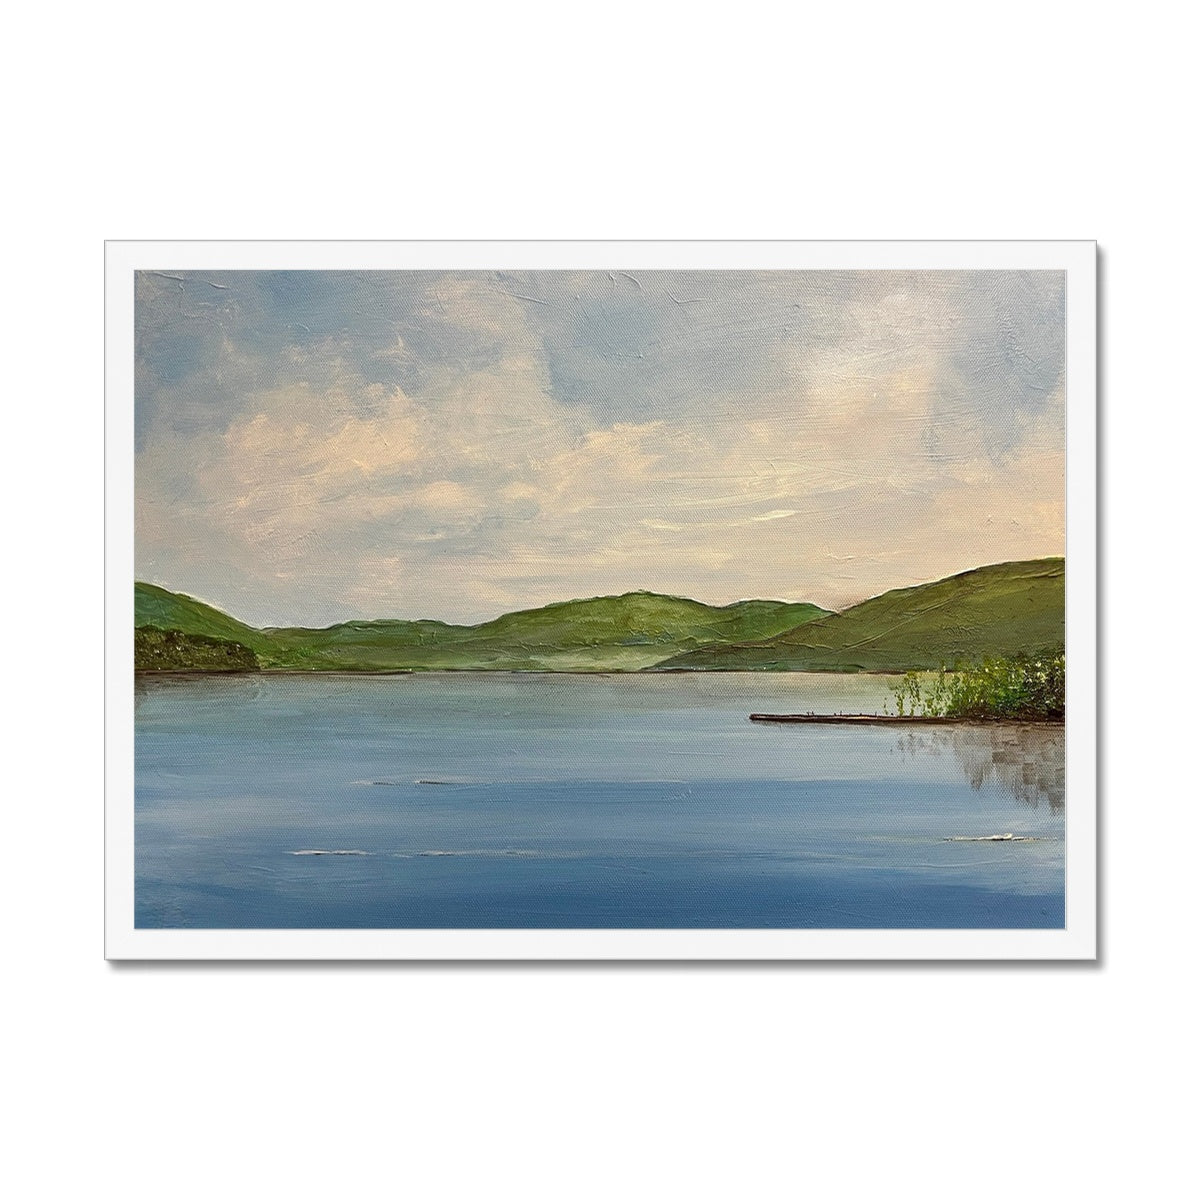 Loch Tay ii Painting | Framed Prints From Scotland-Framed Prints-Scottish Lochs & Mountains Art Gallery-A2 Landscape-White Frame-Paintings, Prints, Homeware, Art Gifts From Scotland By Scottish Artist Kevin Hunter